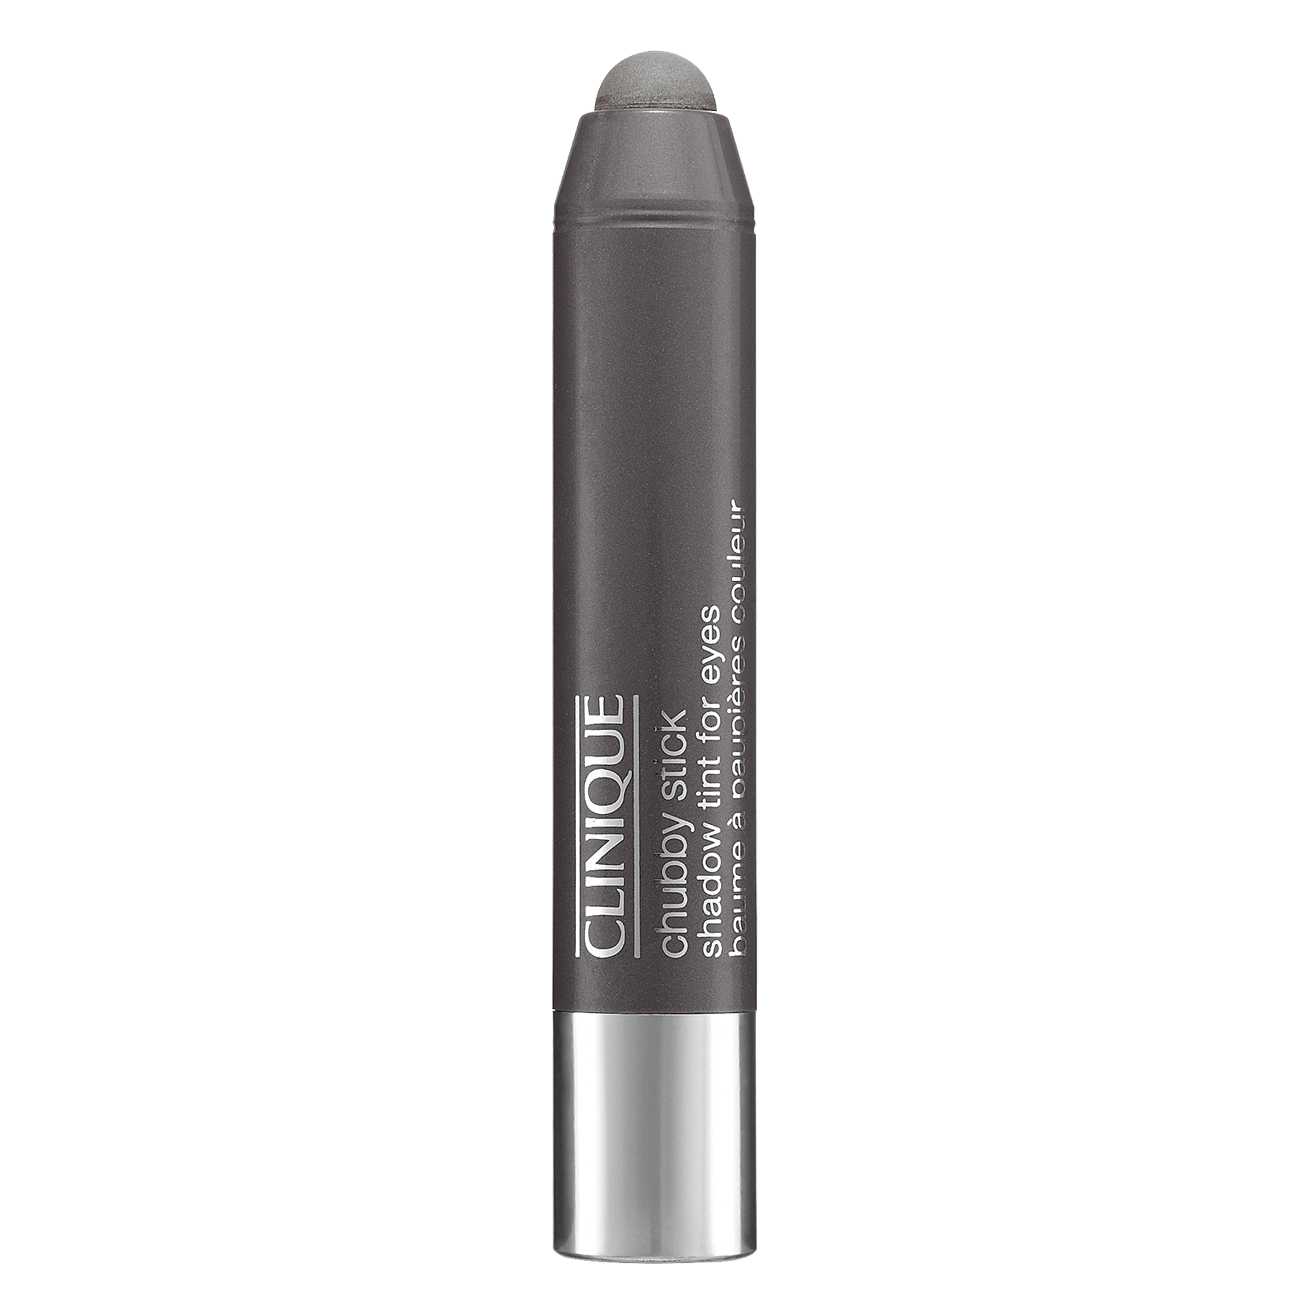 CHUBBY STICK SHADOW TINT FOR EYES Curvacous Coal 8 Clinique bestvalue.eu